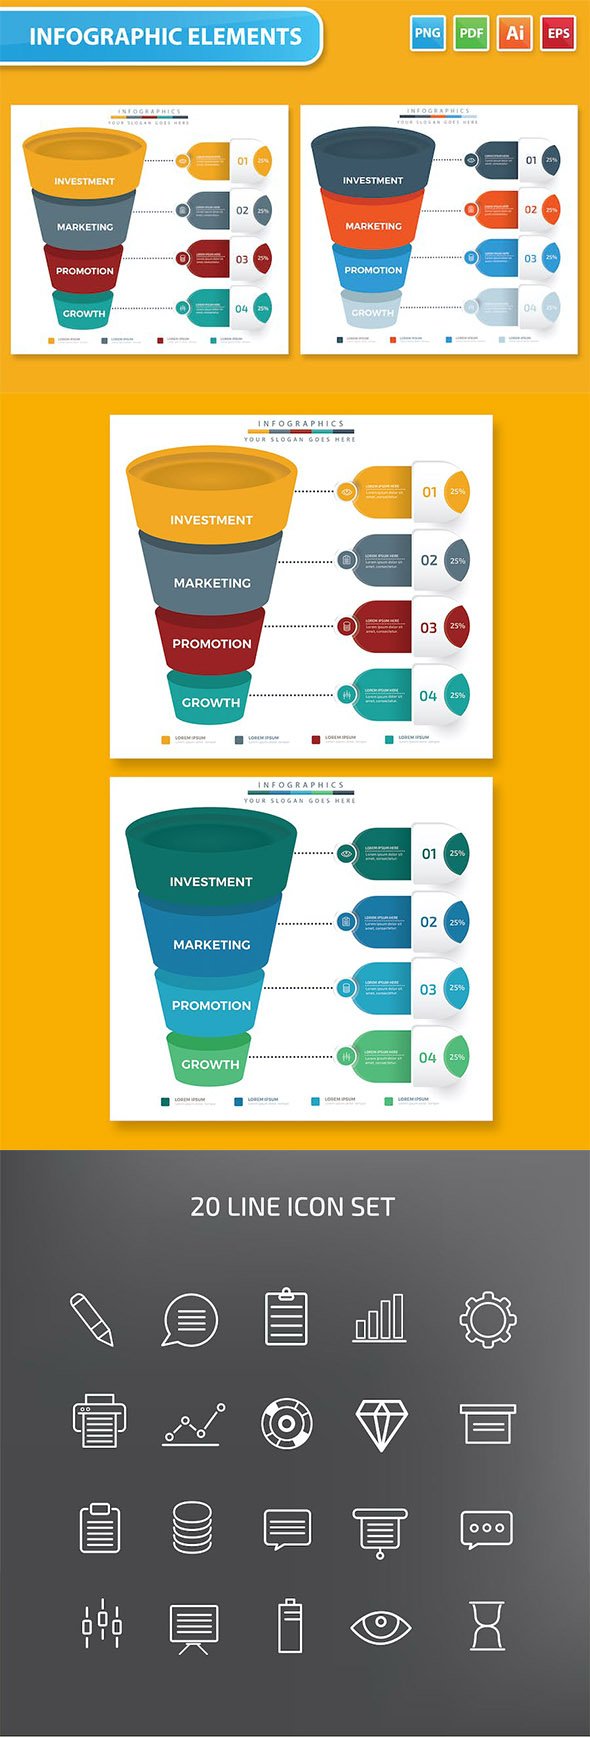 Funnel Infographic Elements - 2YW9B58